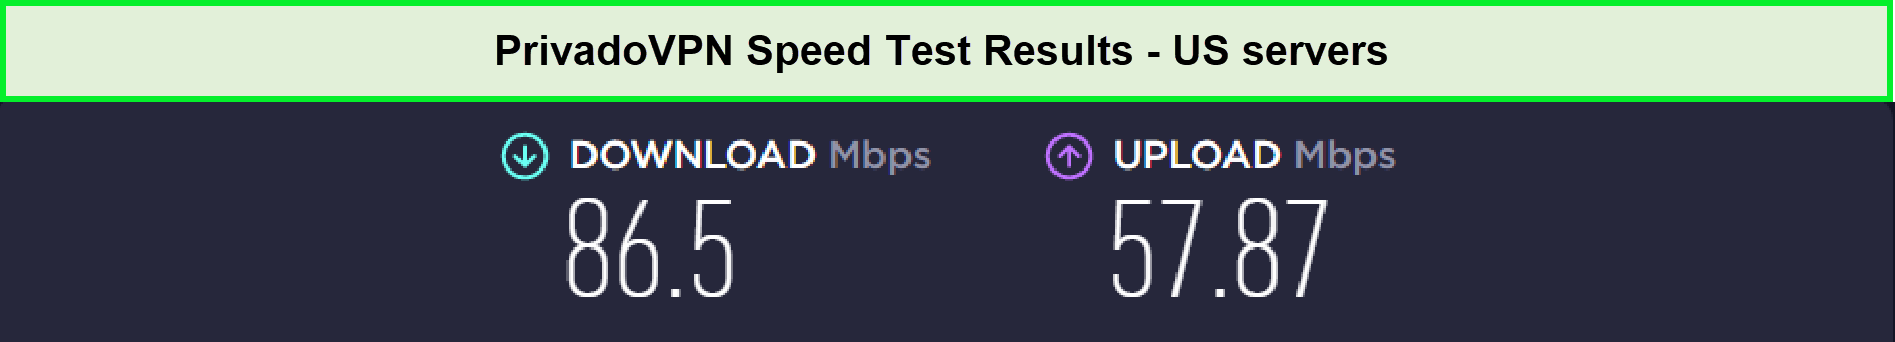 privadovpn-speed-tests-in-Italy